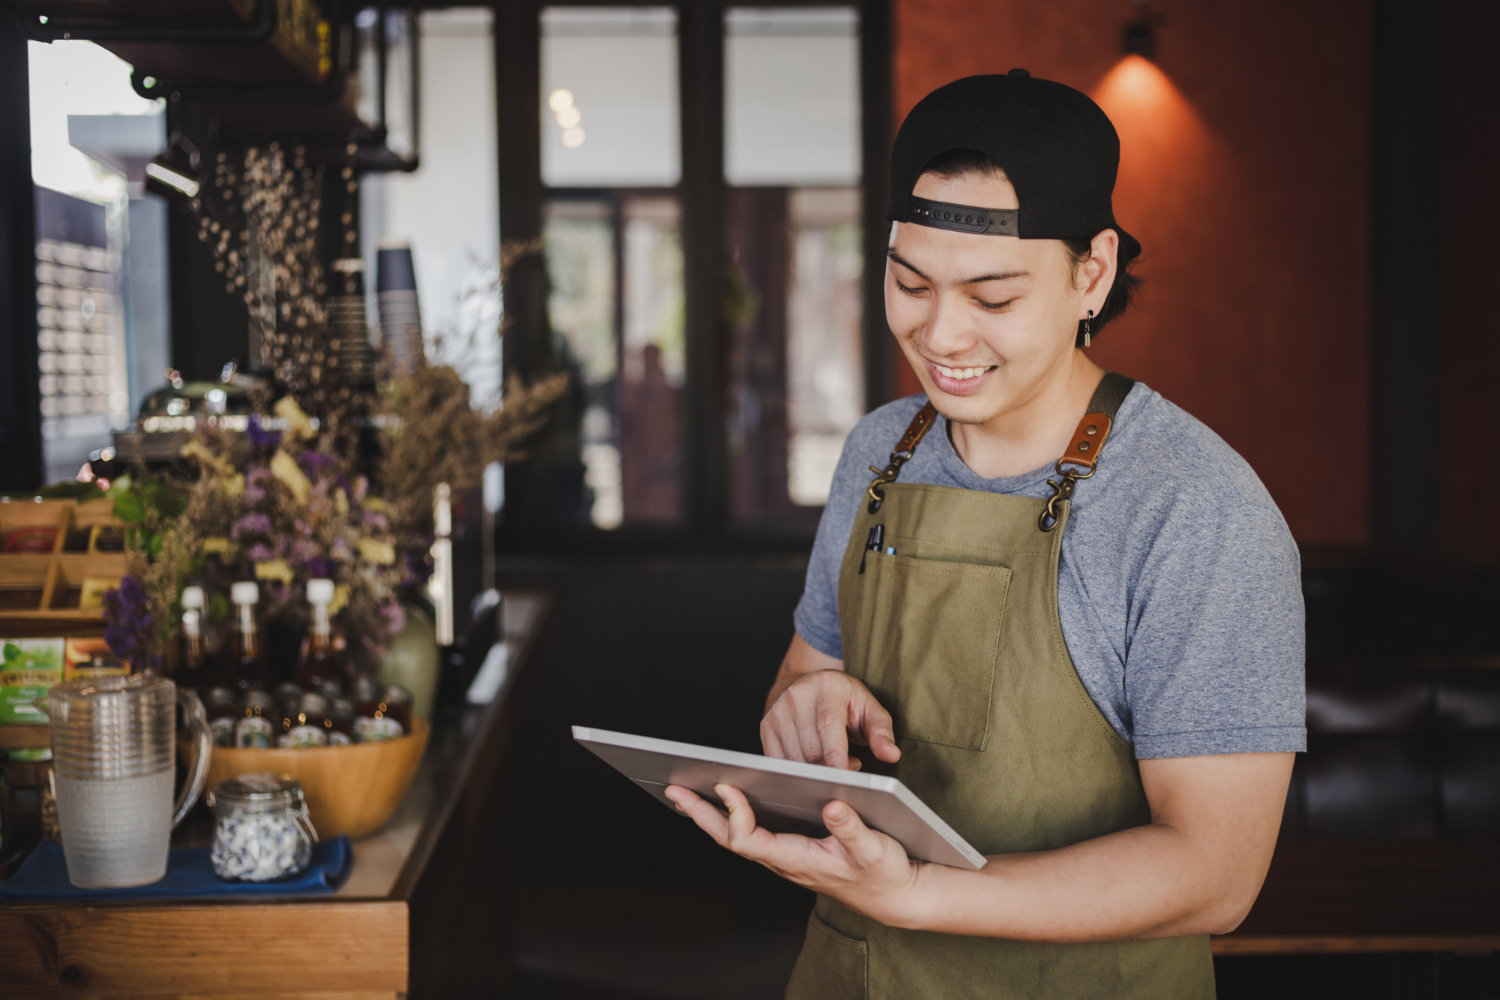 6 considerations for restaurant software shoppers